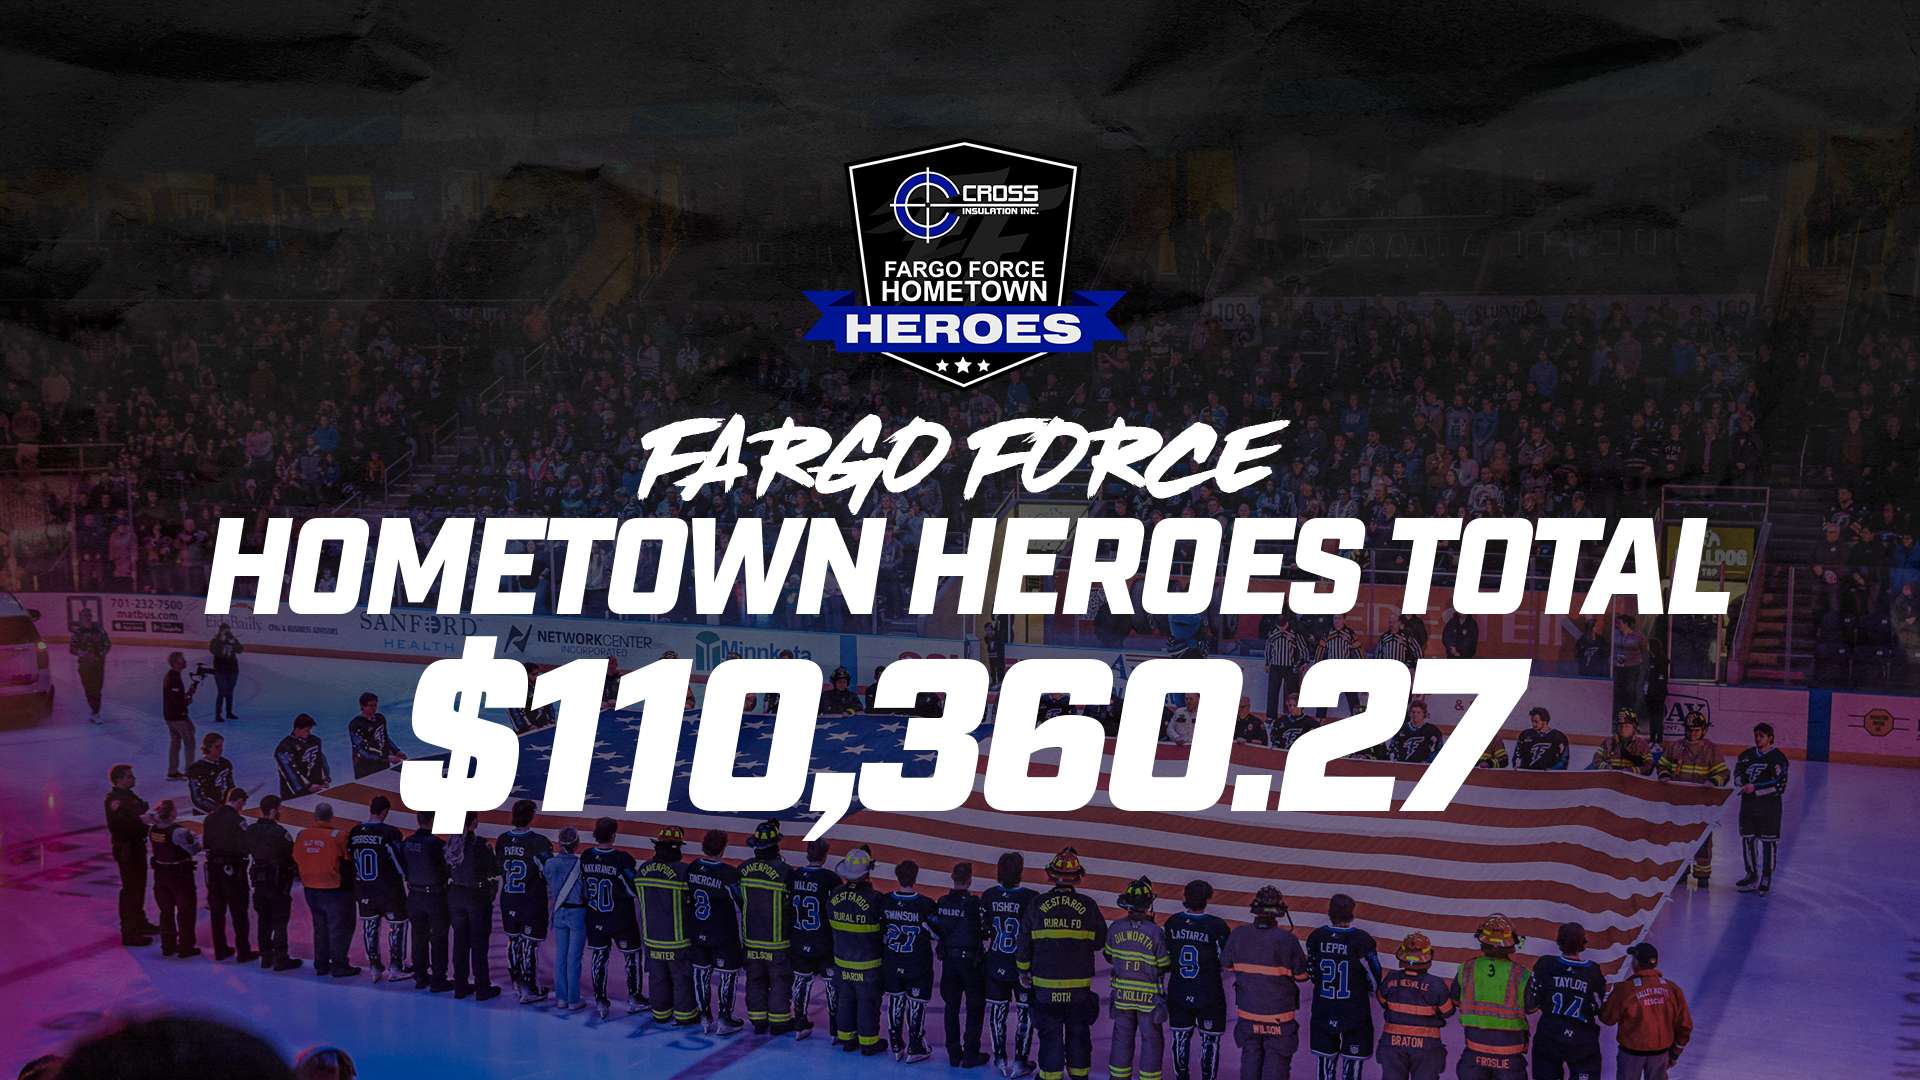 Fargo Force 10th Annual Hometown Heroes Raises Record Amount of $110,360.27